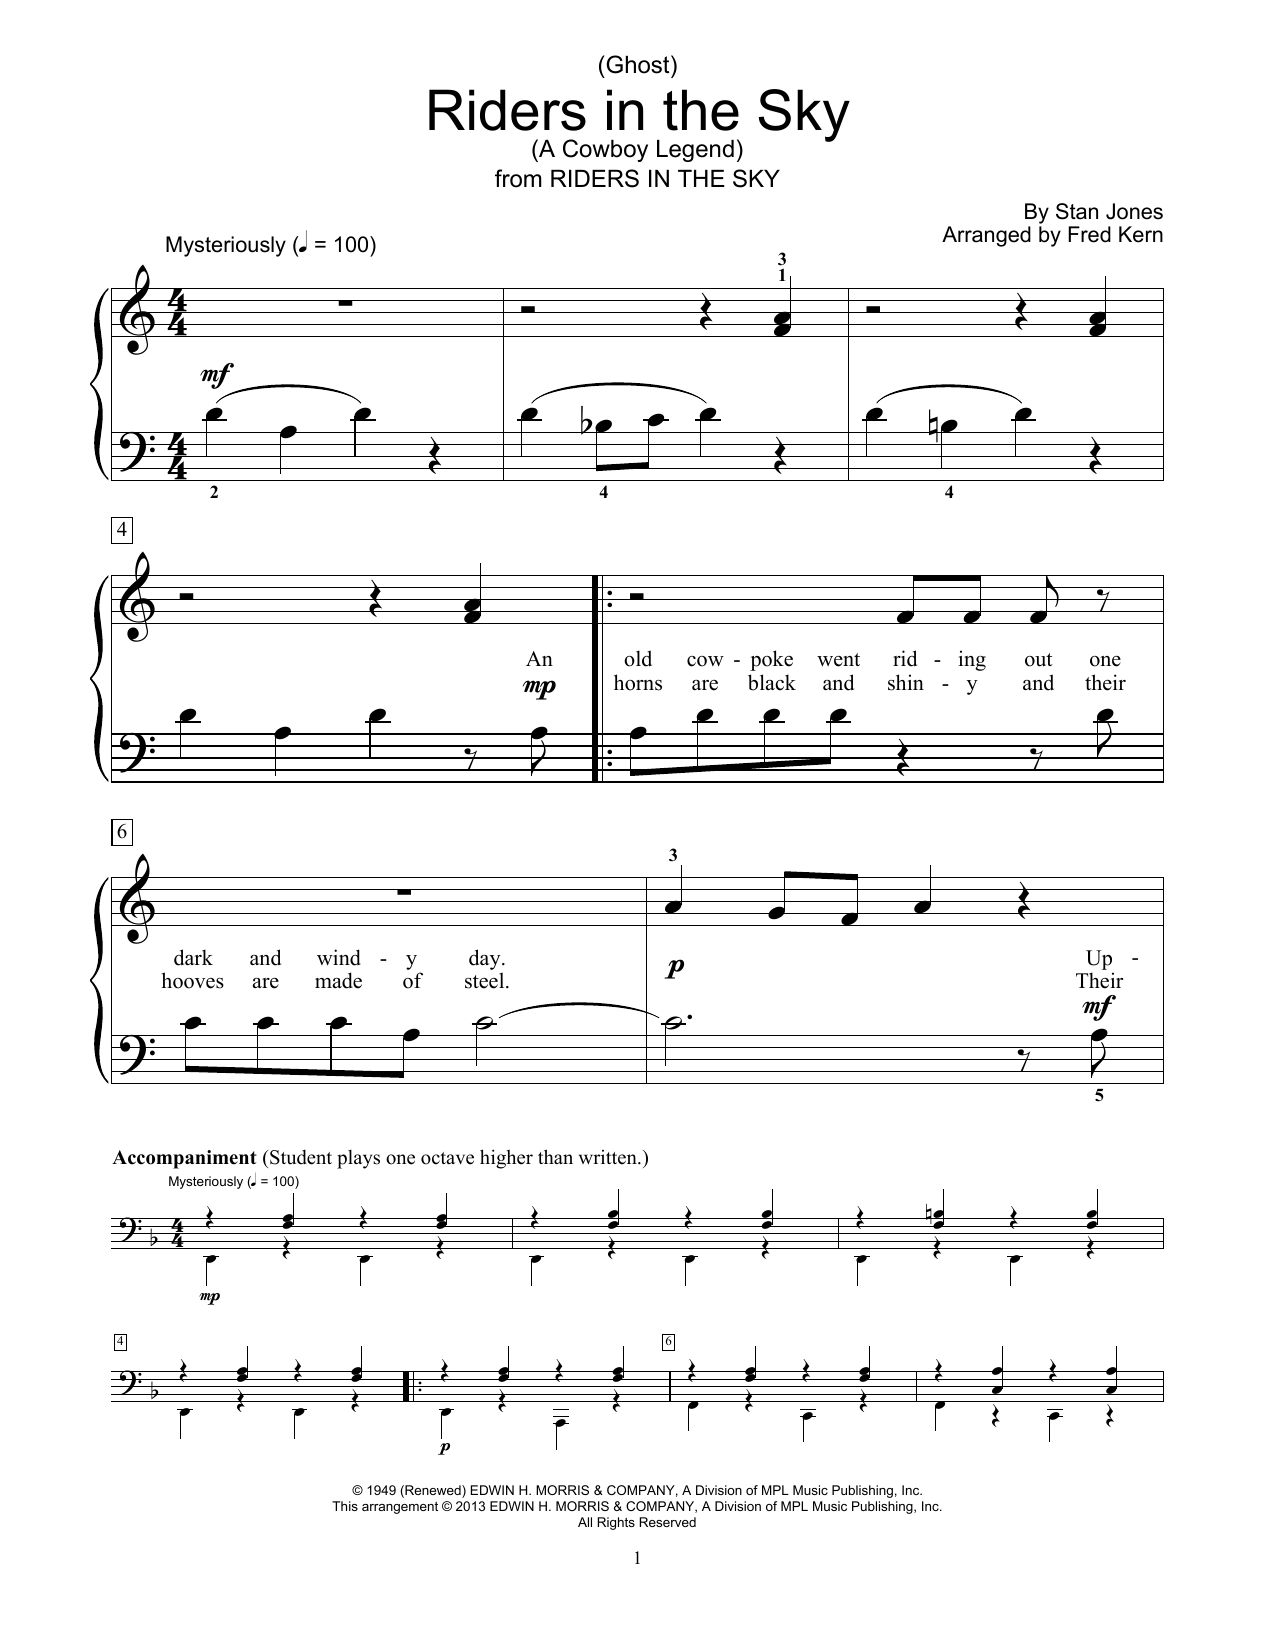 Download Fred Kern (Ghost) Riders In The Sky (A Cowboy Leg Sheet Music